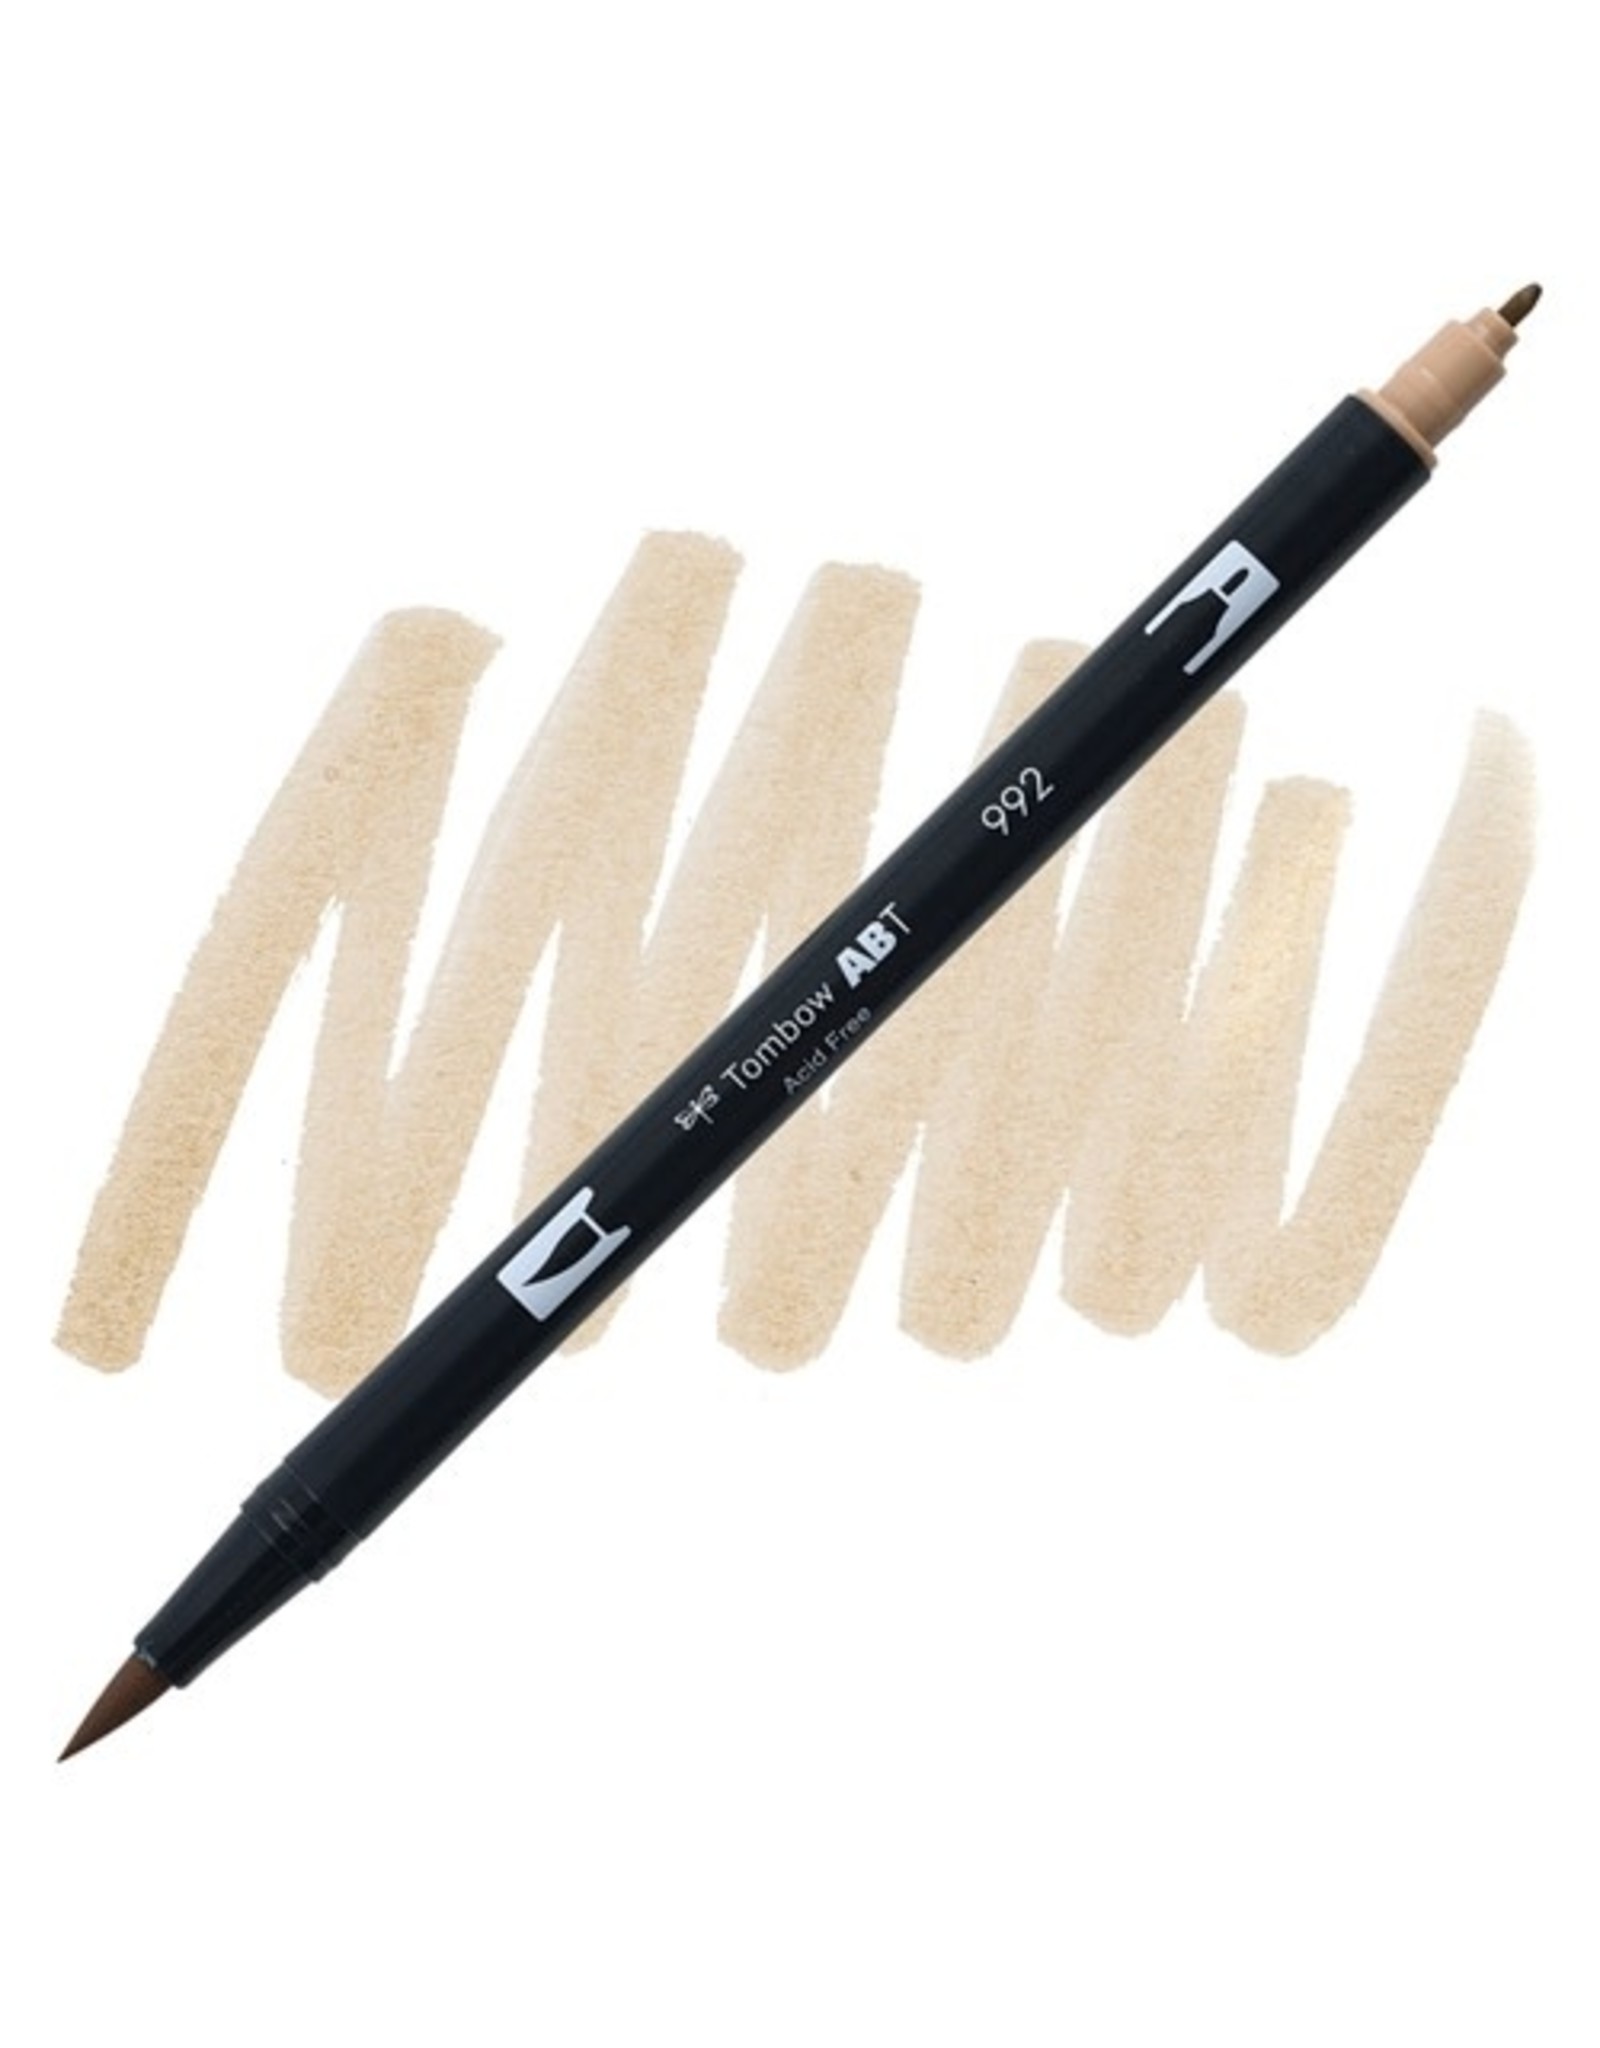 TOMBOW TOMBOW ABT-992 SAND DUAL BRUSH MARKER